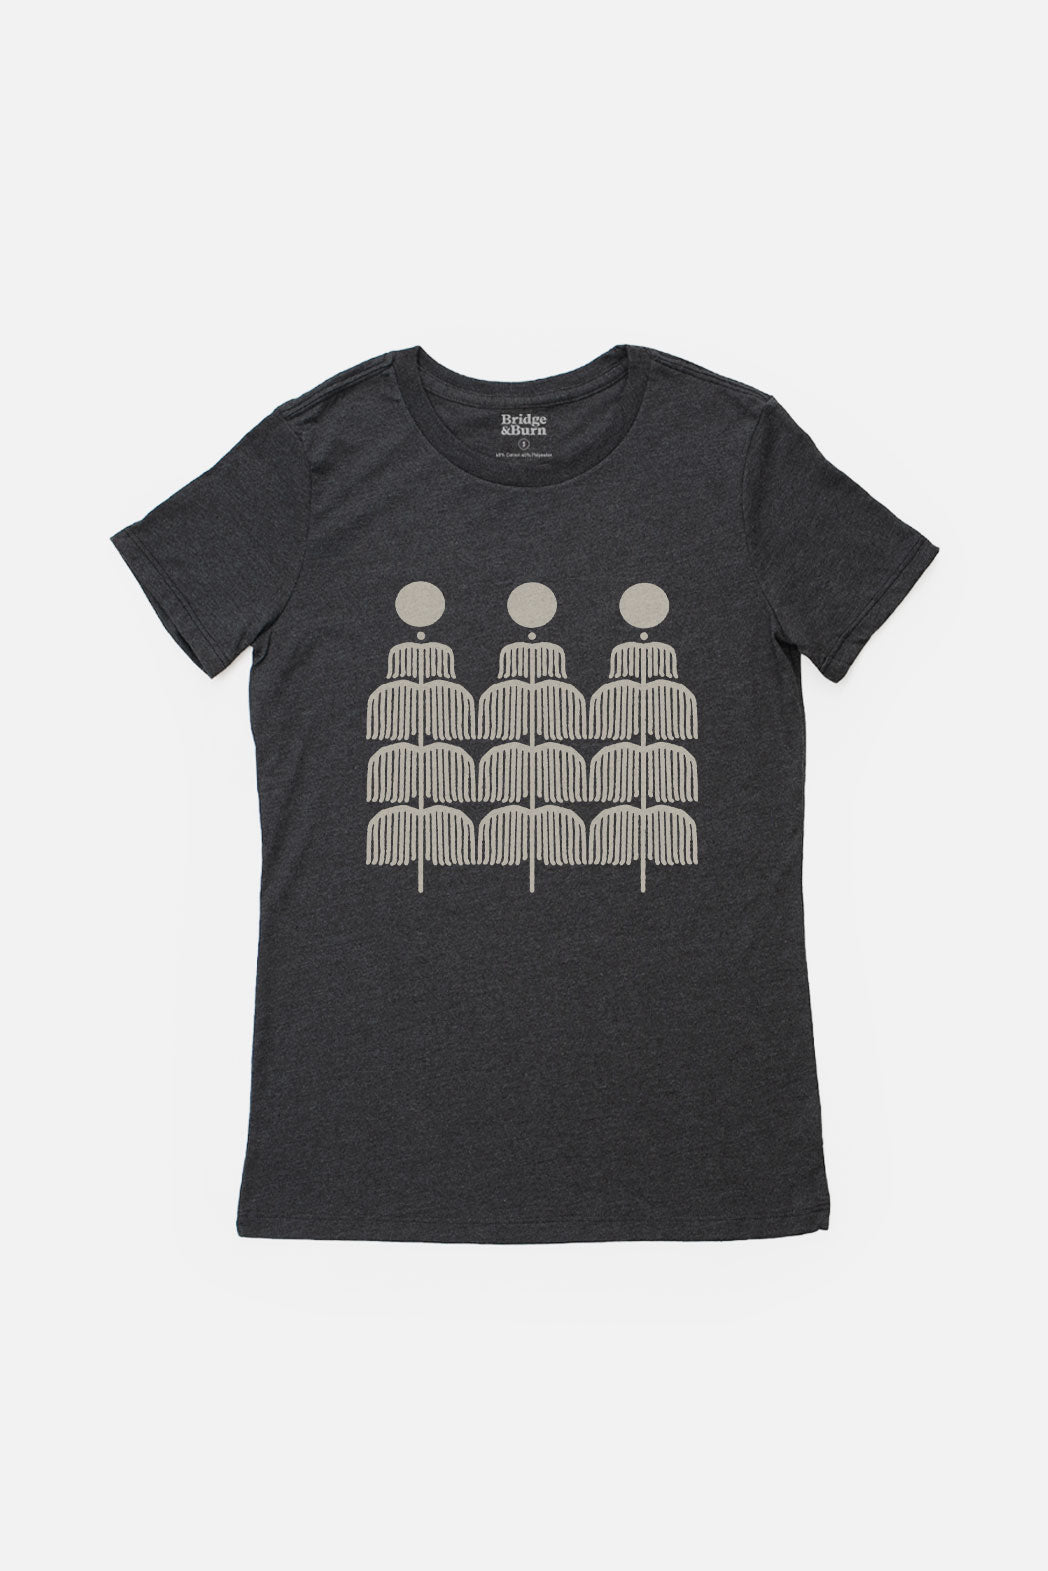 Women's Growth In Sync Charcoal